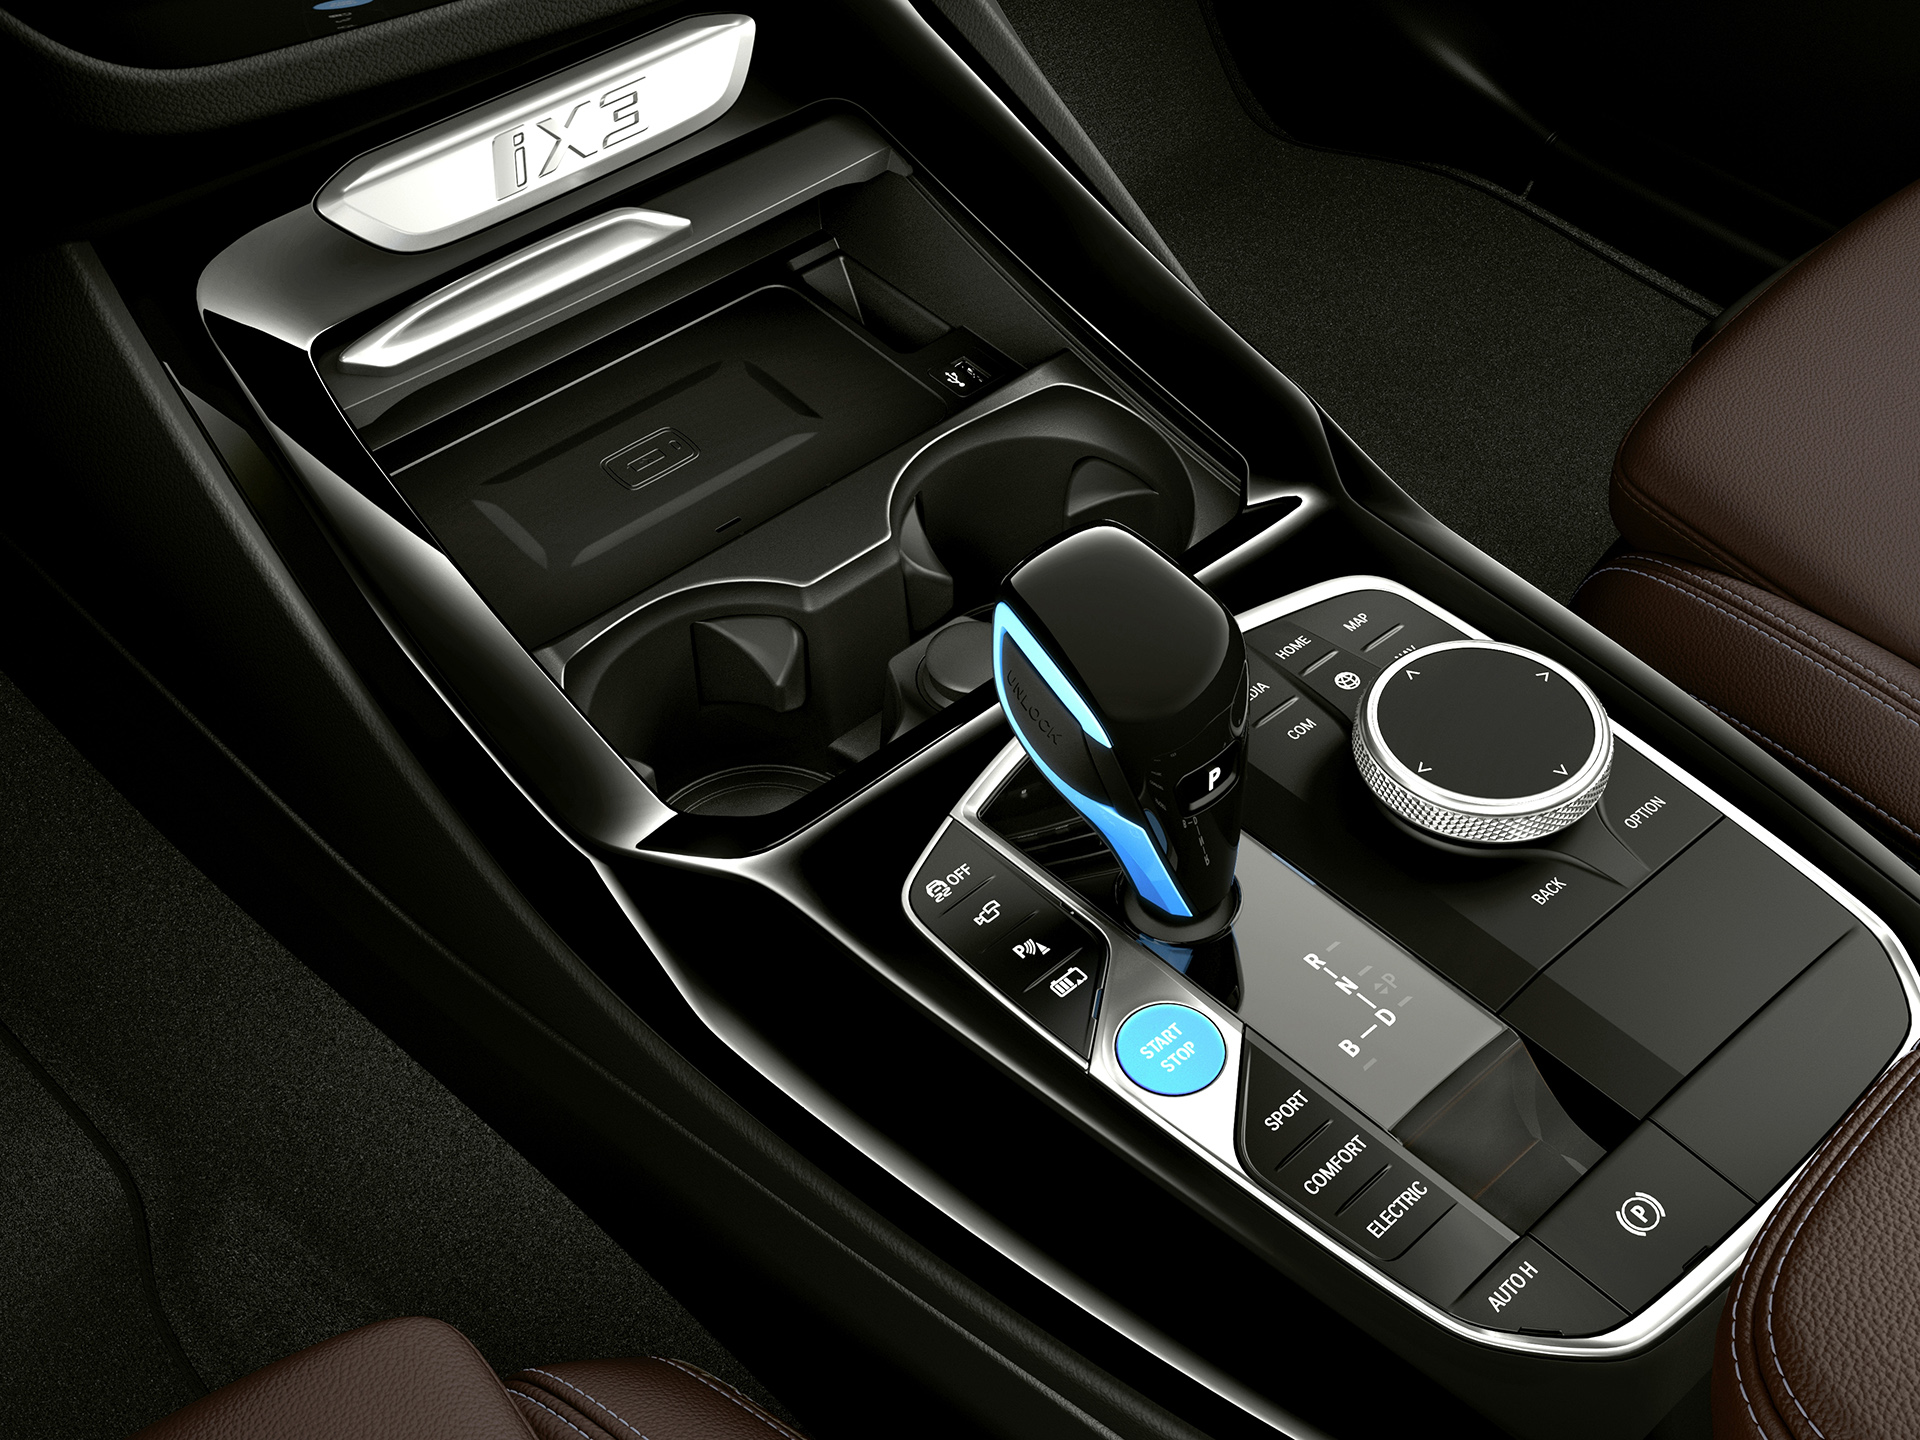 Small changes are seen in the central console, which maintains the lever and changes the signature